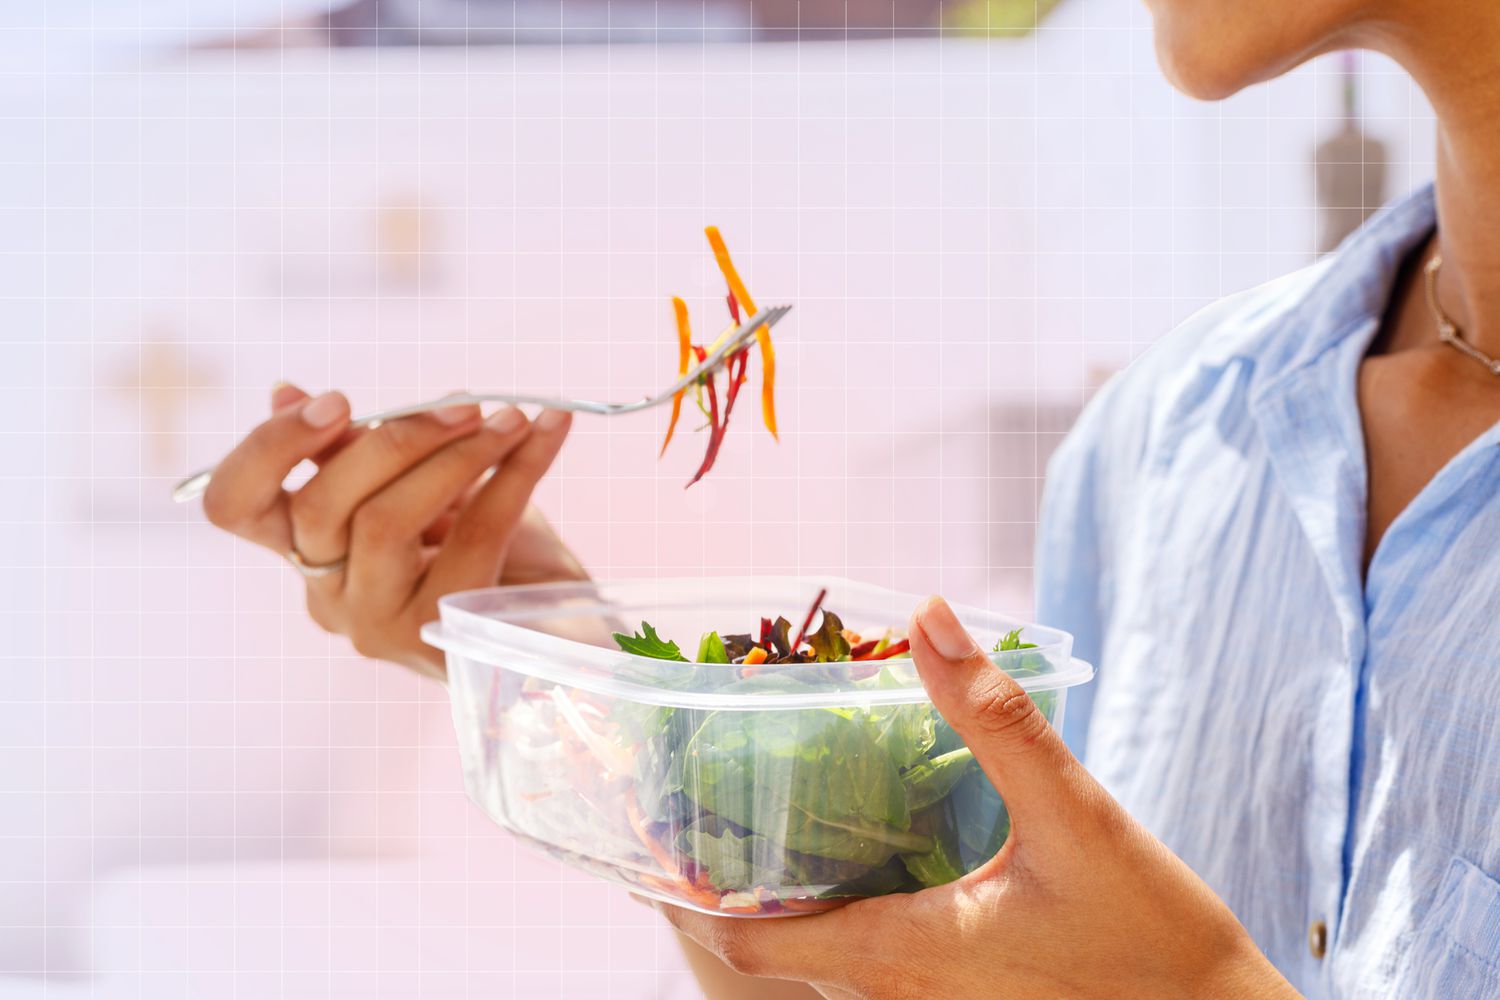 someone eating salad out of plastic container on designed background